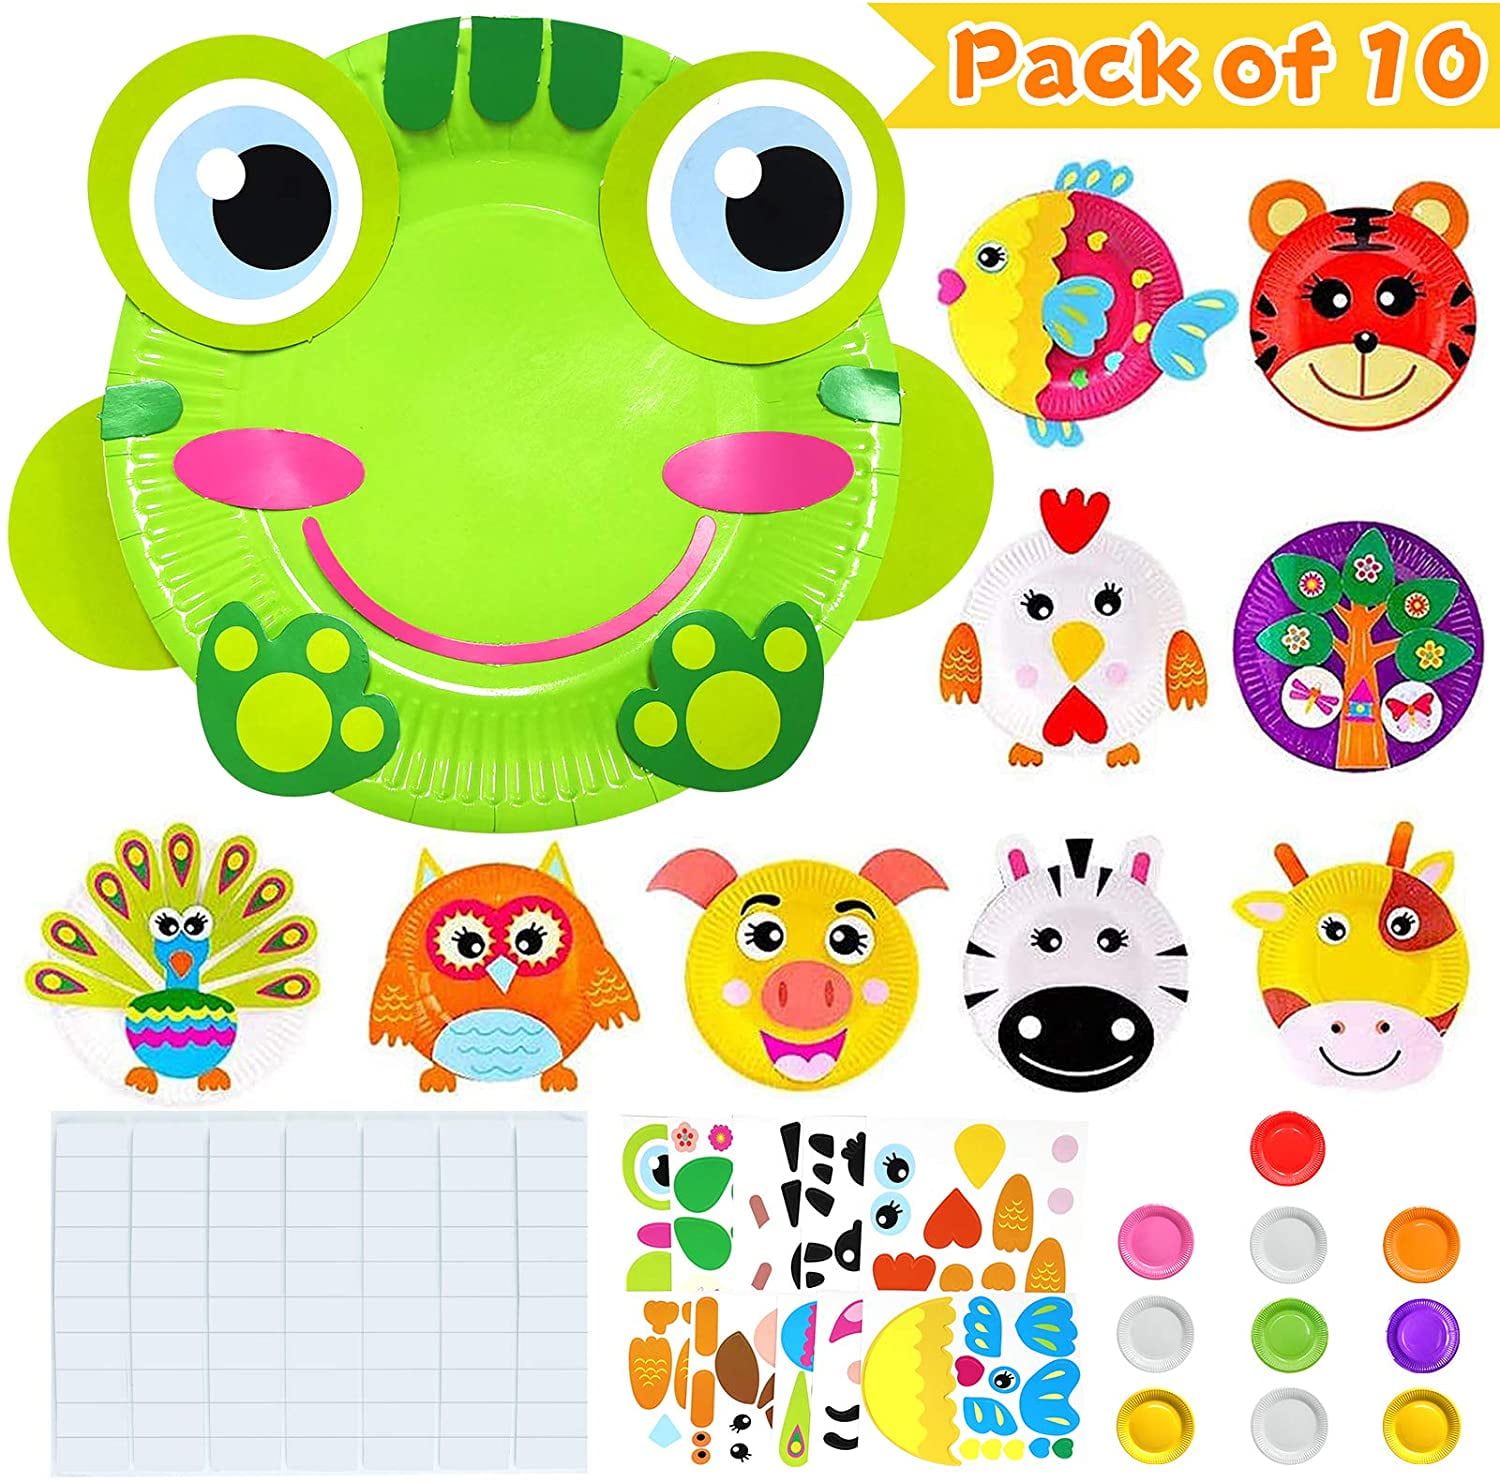 Amerteer 10pcs Toddler Crafts Paper Plate Art Kit Arts and Crafts for Kids Boys Girls Preschool Easy Animal Plate Craft DIY Projects Supply Kit